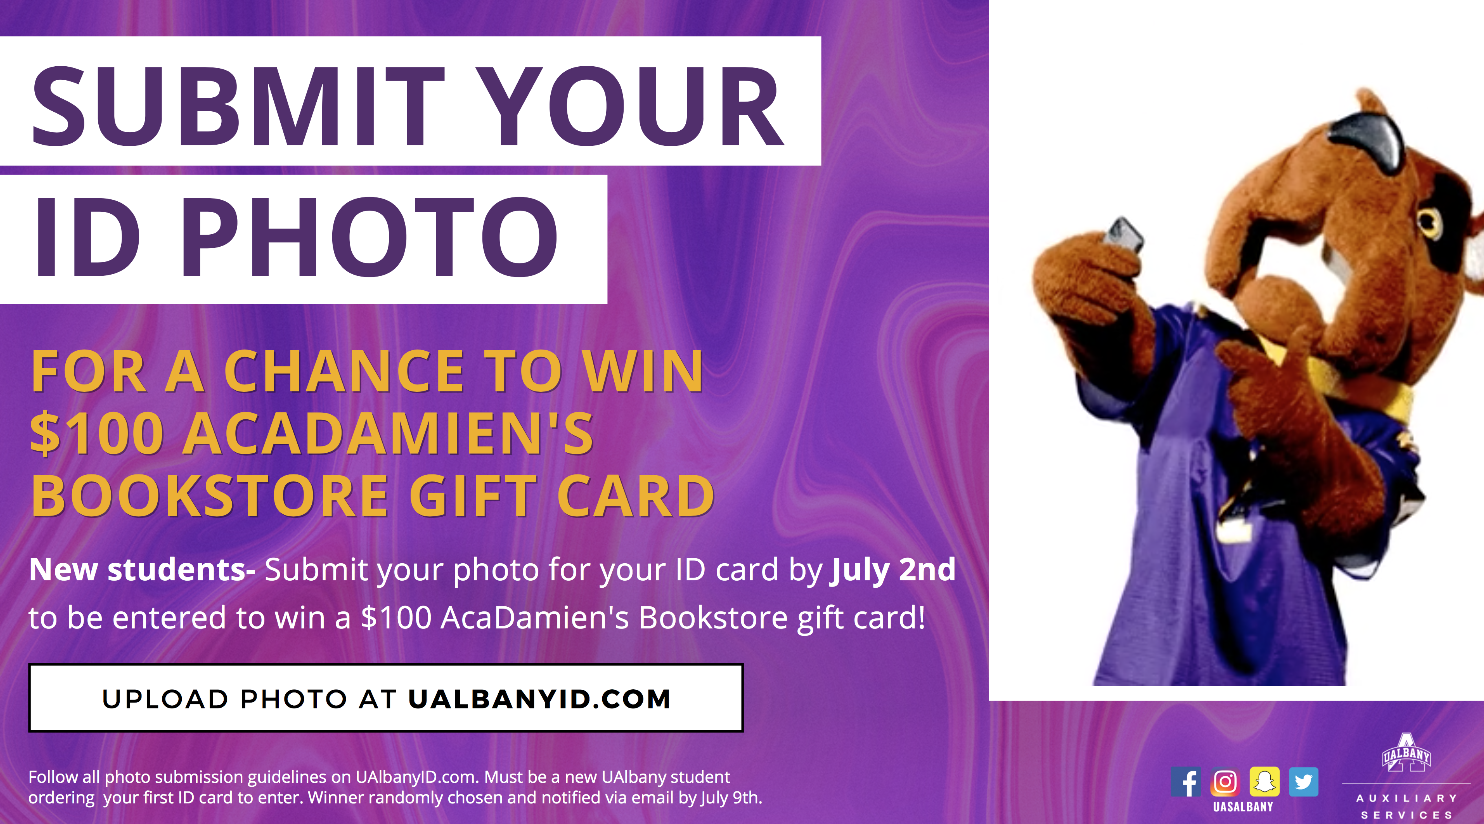 Submit your id photo for a chance to win a $100 Bookstore gift card! New students- Submit your photo to UAlbanyID.com by July 2nd to be entered in the raffle. Follow all submission guidelines on UAlbanyID.com. Must be a new UAlbany student ordering your first ID card to enter. Winner randomly chosen and notified by email by July 9th. 